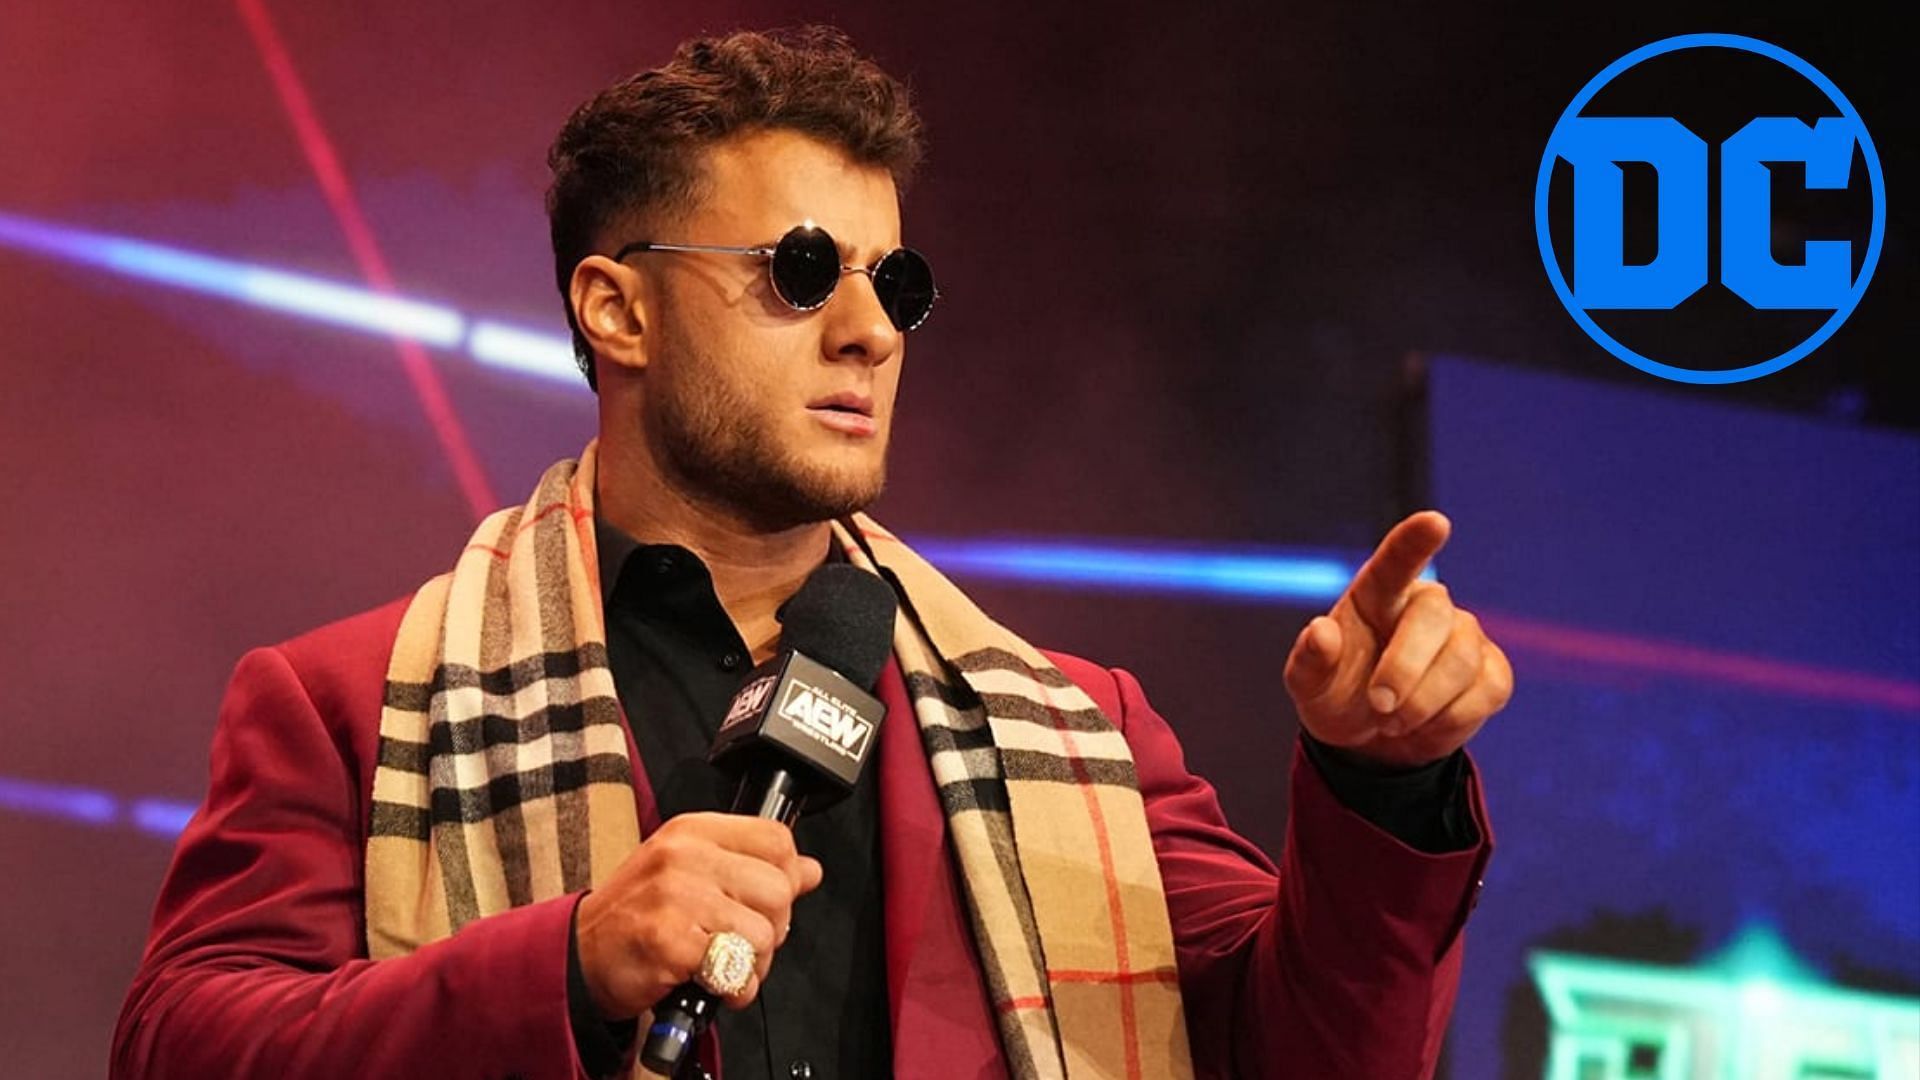 MJF is set to become the longest reigning AEW World Champion